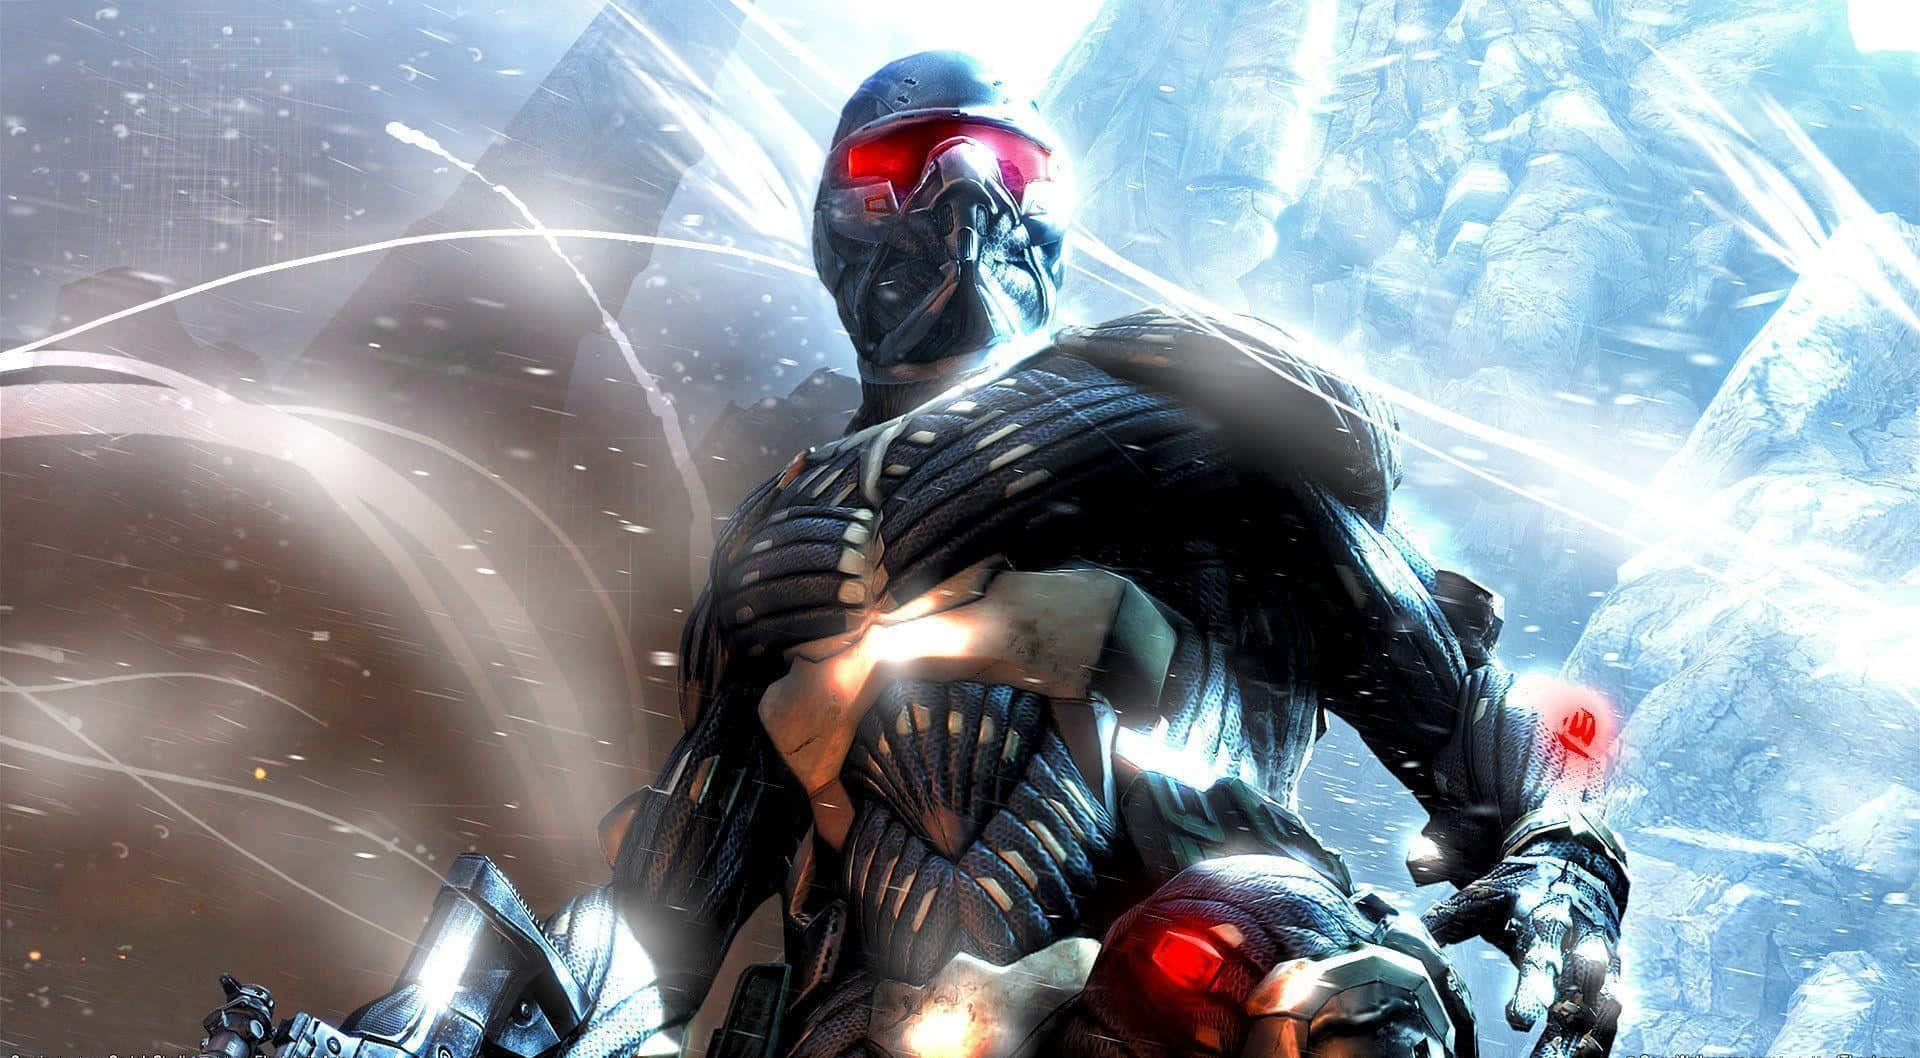 Destroy your enemies in beautiful graphics with the acclaimed video game, Crysis HD. Wallpaper